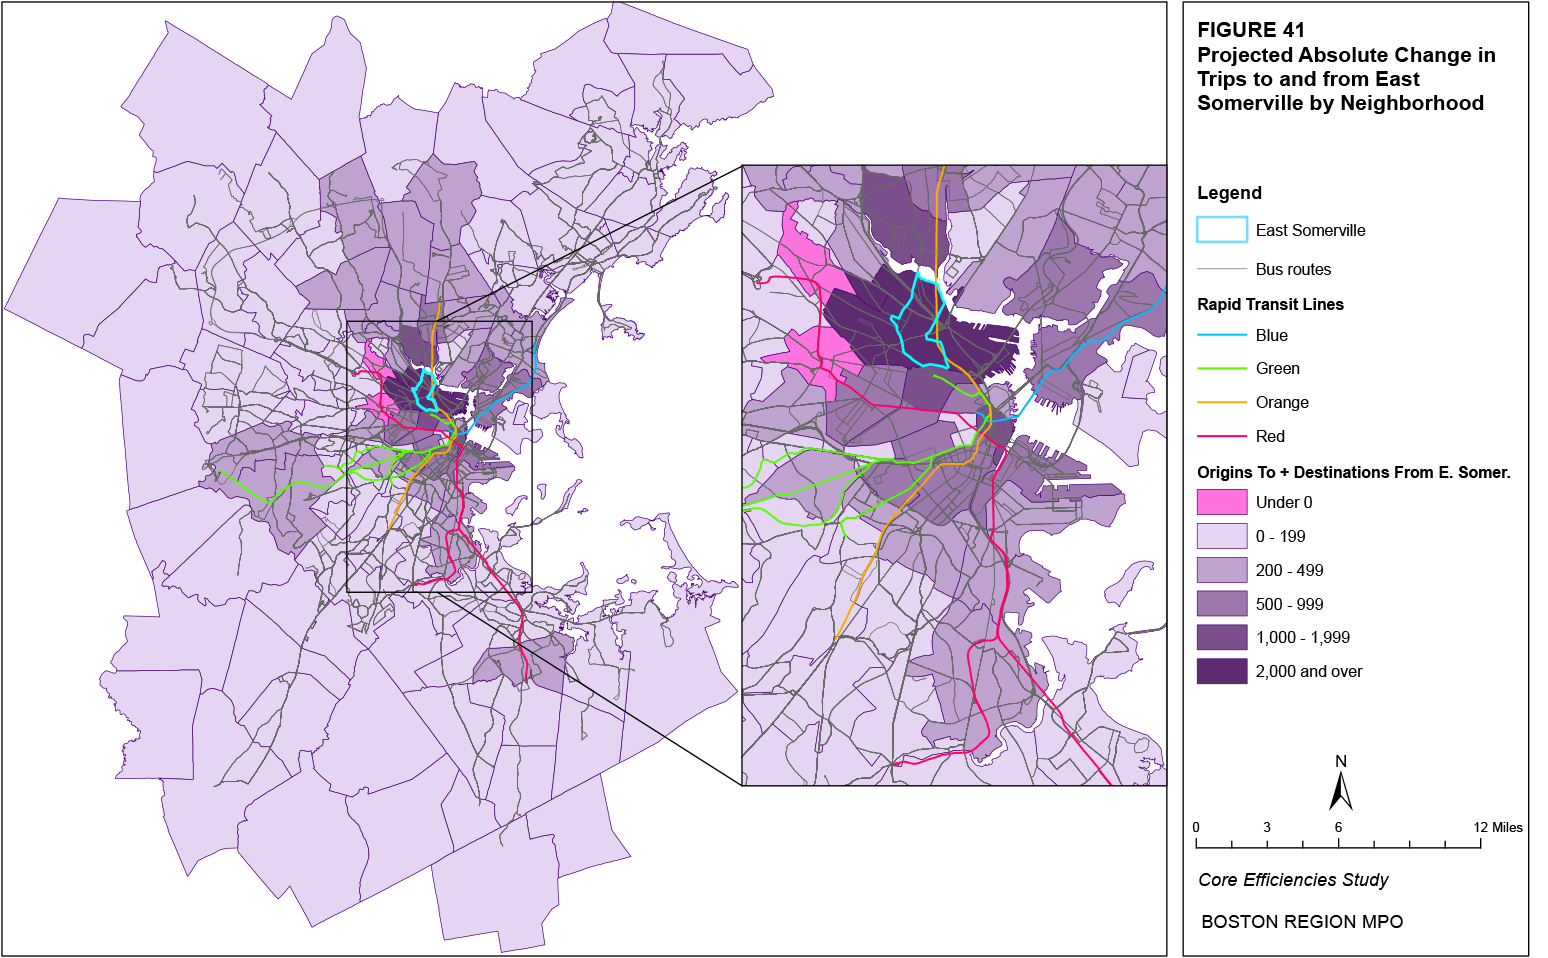 This map shows the projected absolute change in trips to and from the East Somerville neighborhood by neighborhood.